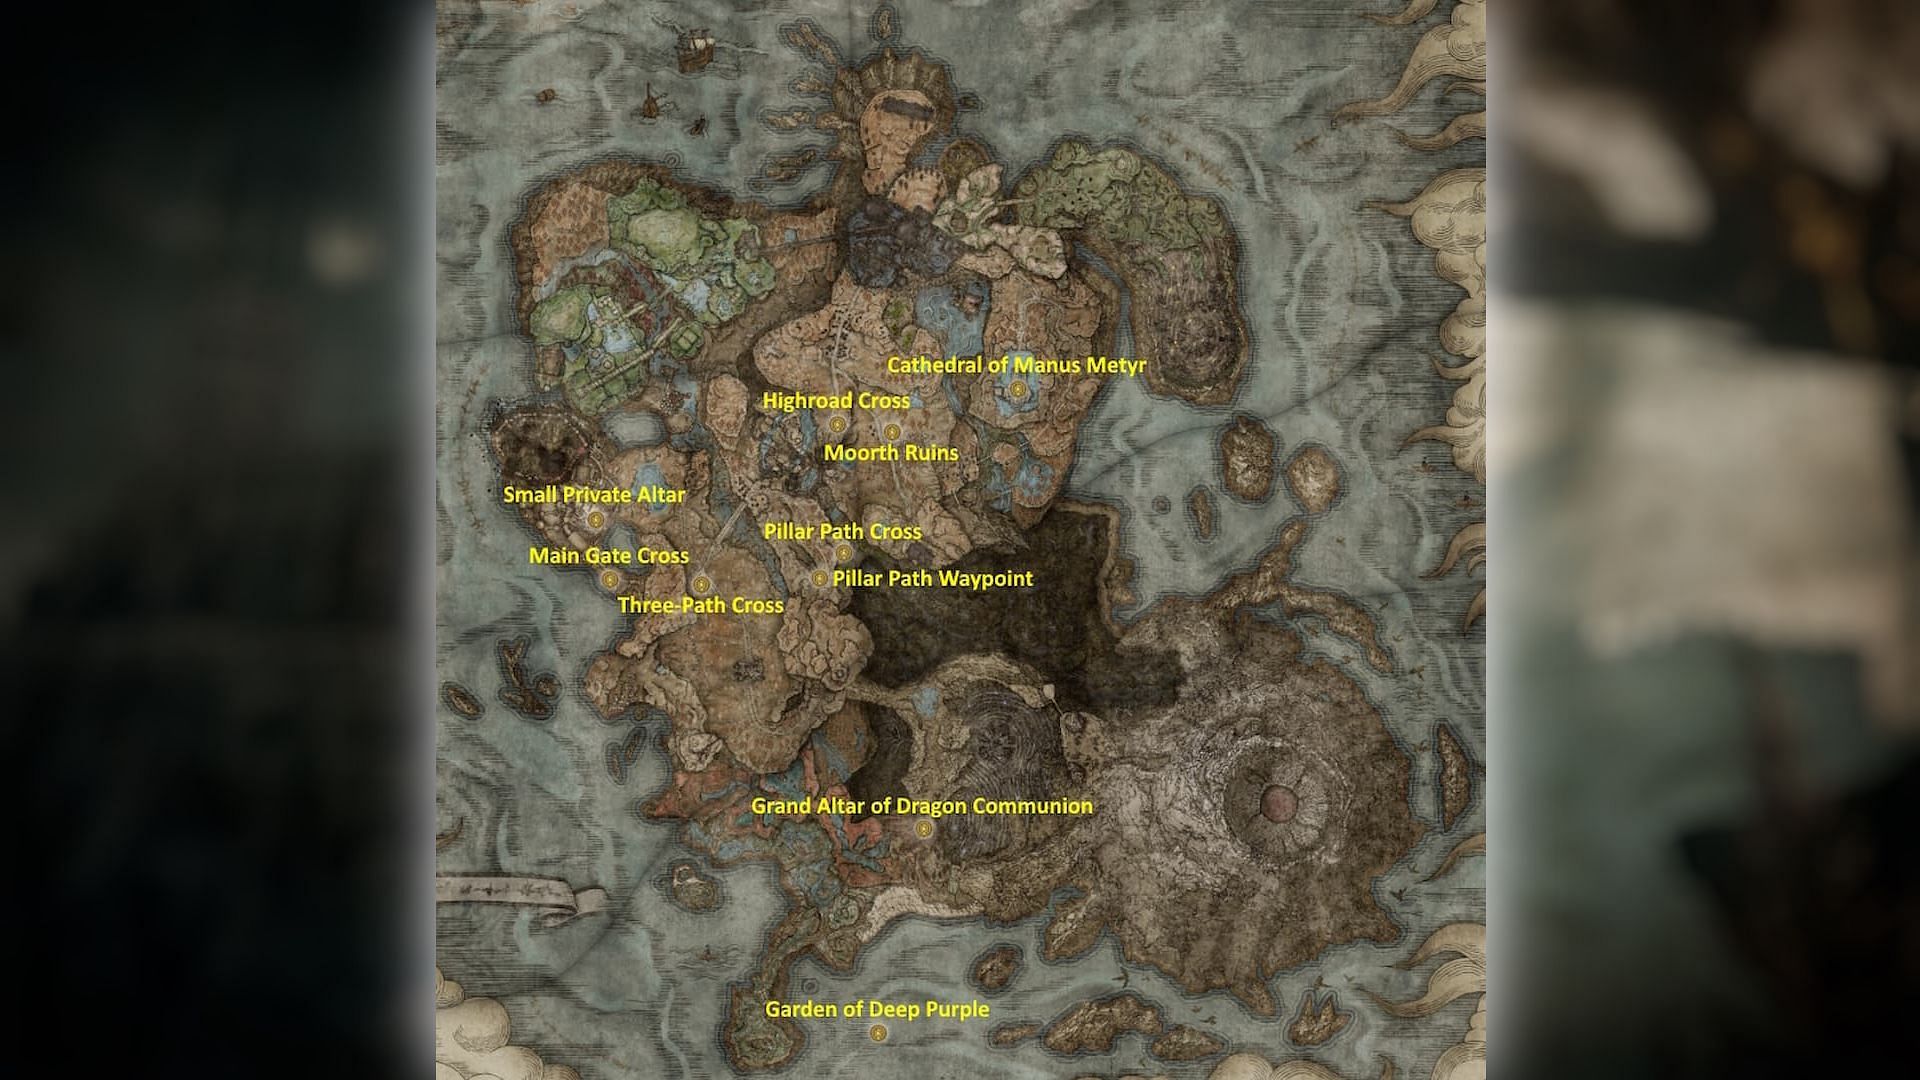 All site of Grace locations near the new NPCs in Elden Ring Shadow of the Erdtree (Image via From Software)